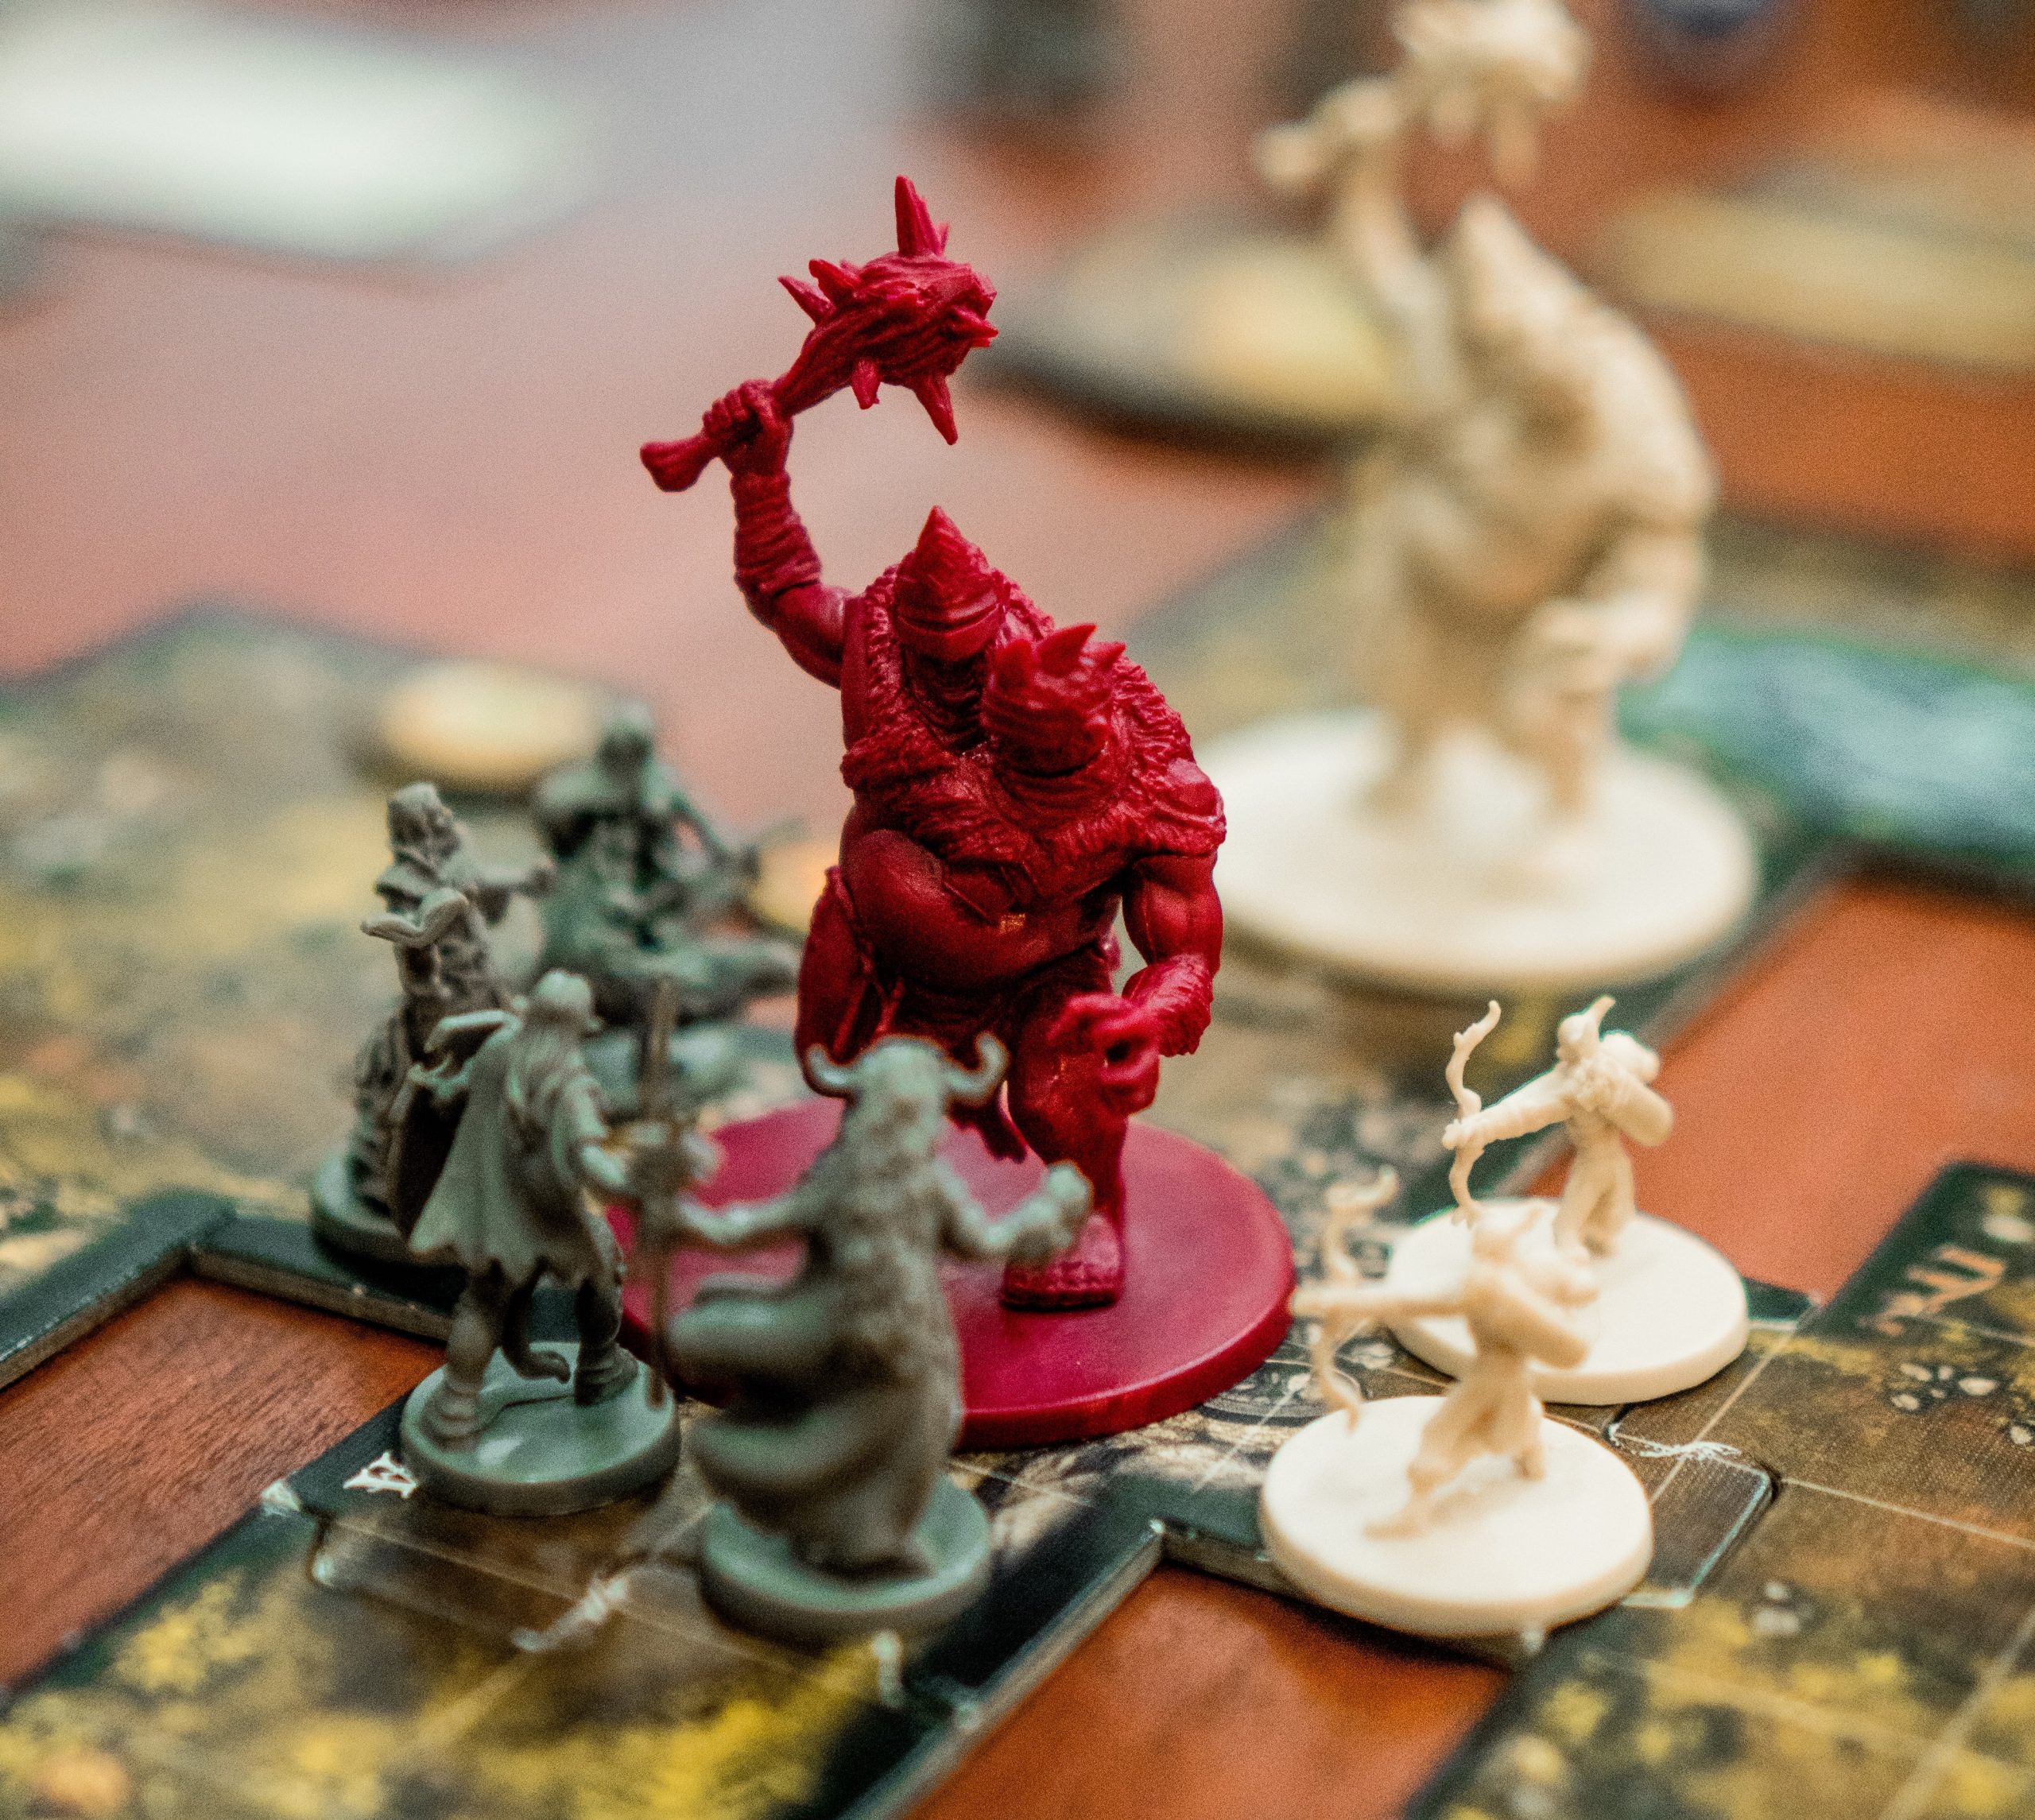 A gameboard on which a group of small adventurer figures confronts a large red troll figure.